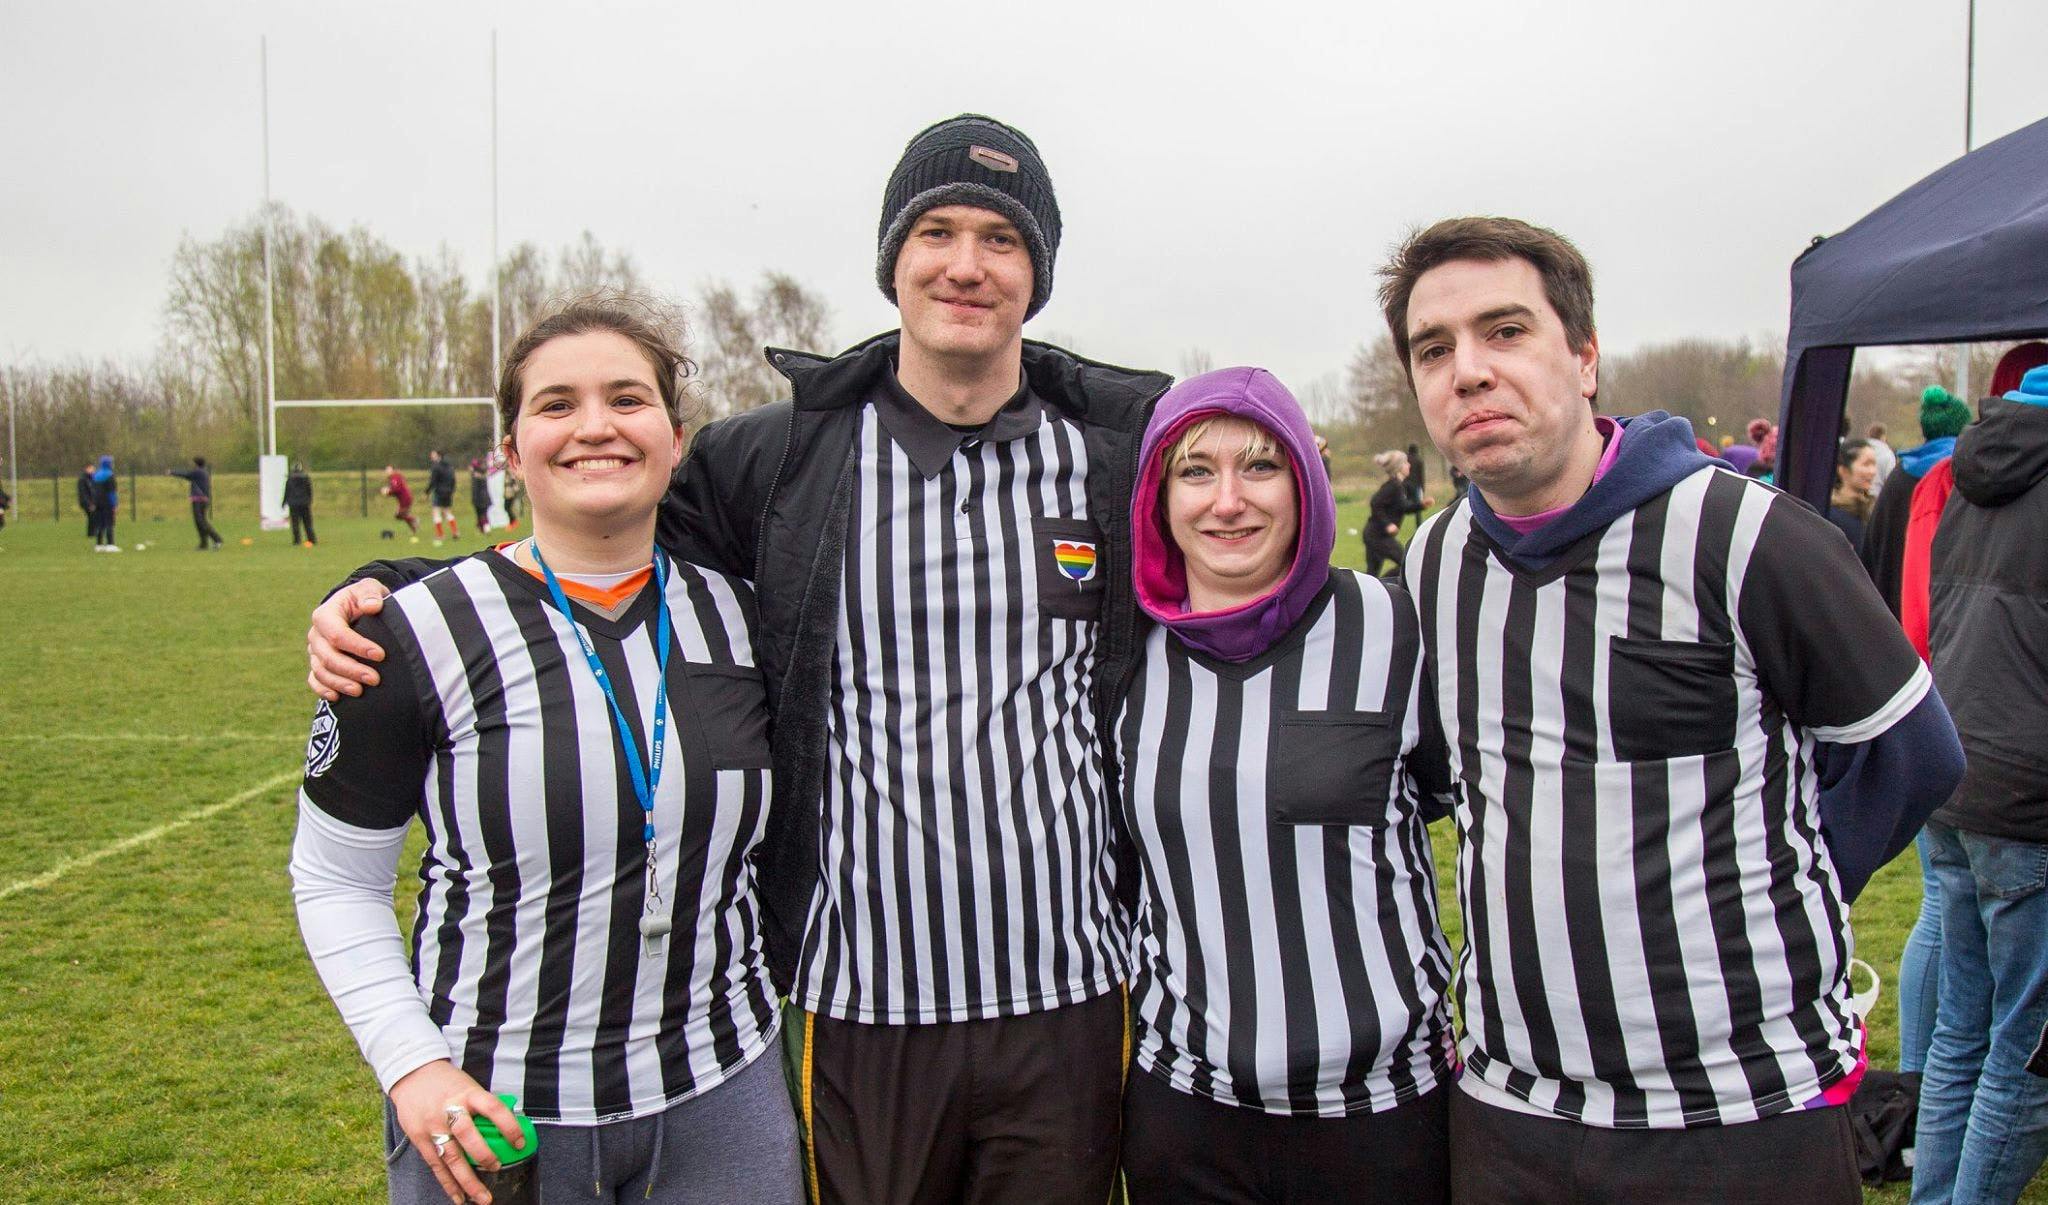 Refs pose together before a match, all wearing their referee shirts